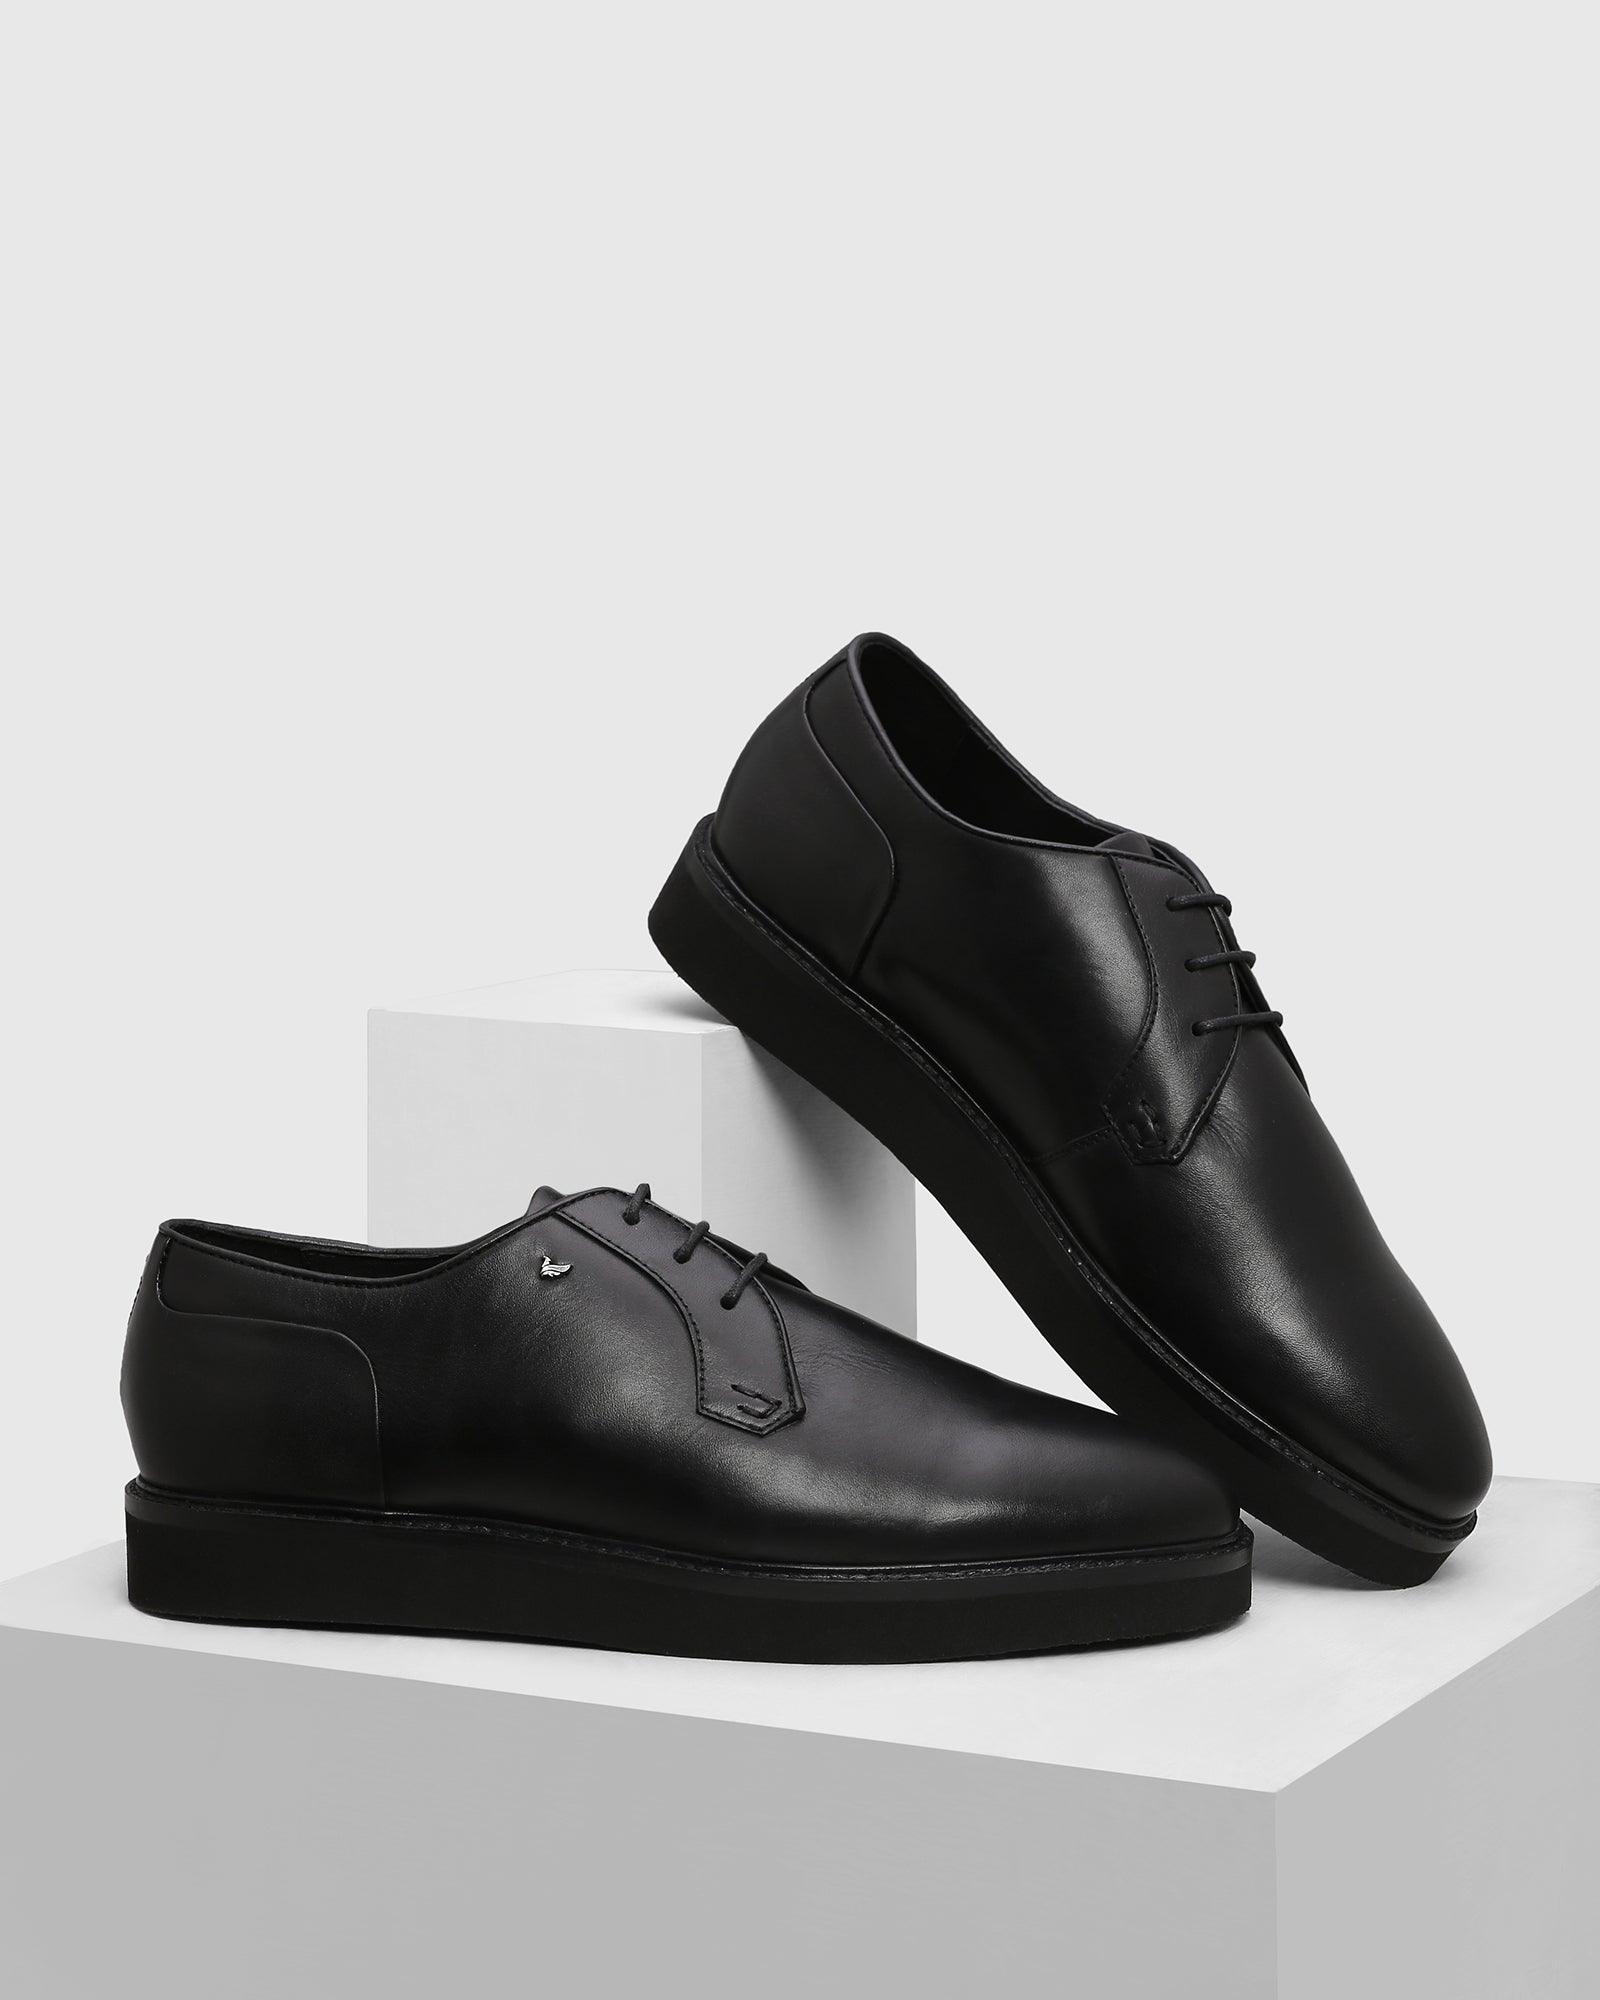 Formal Derby Shoes